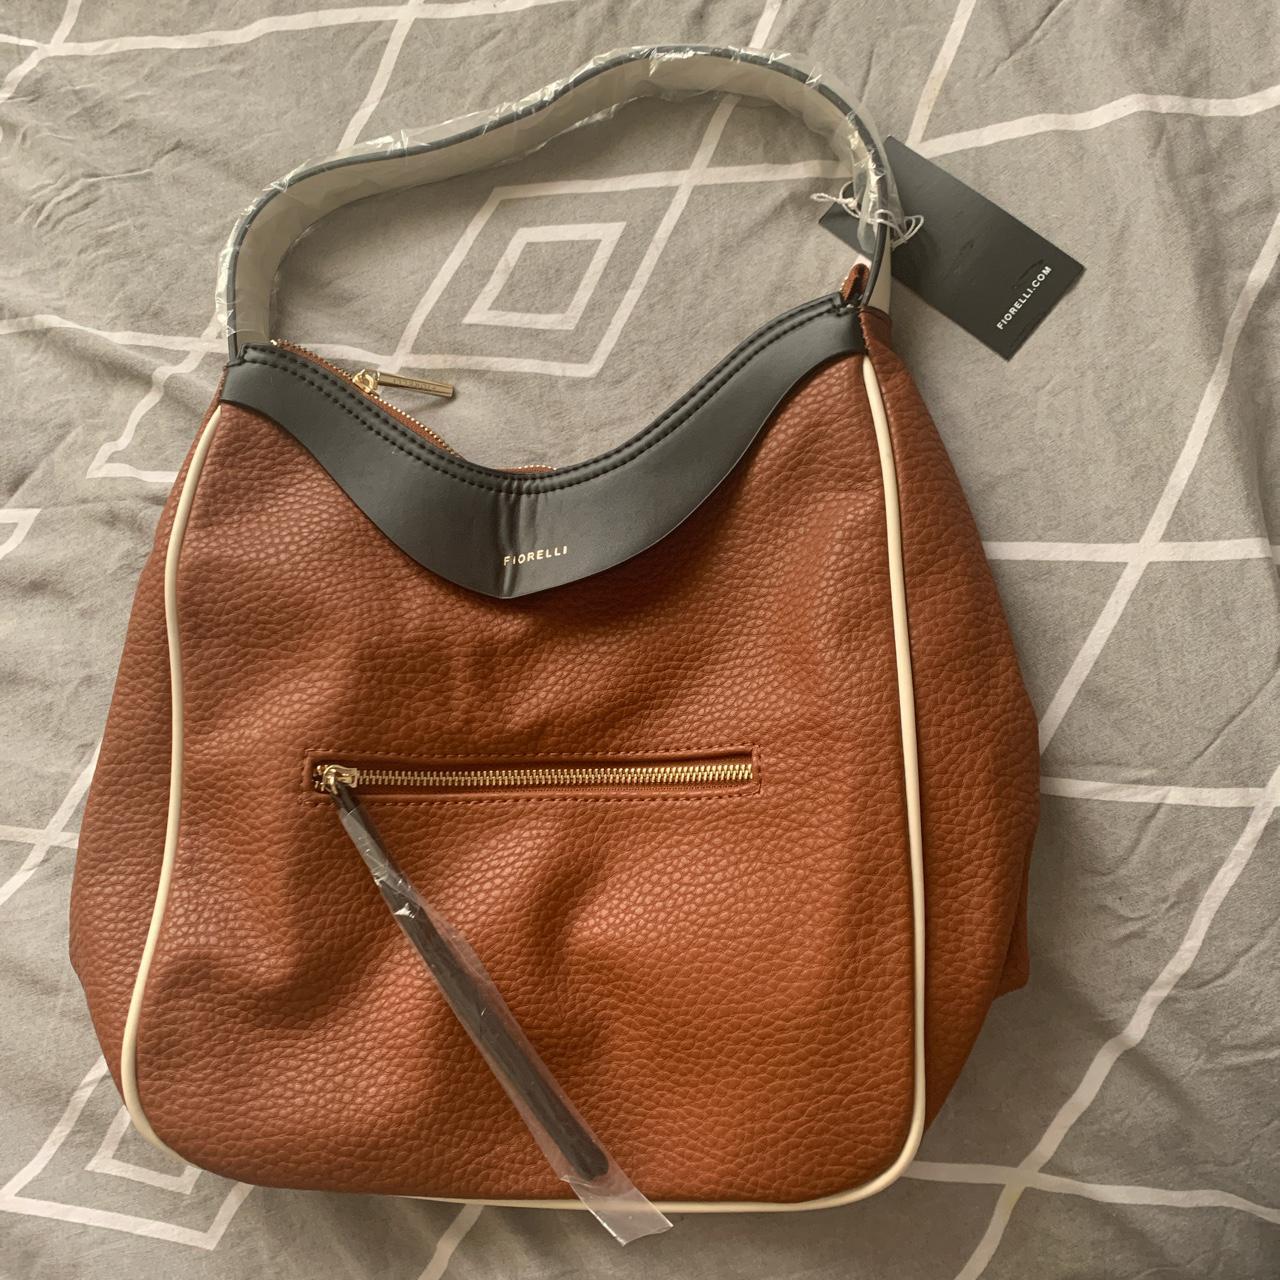 Product Image 1 - Fiorelli Bag 


Never used brand